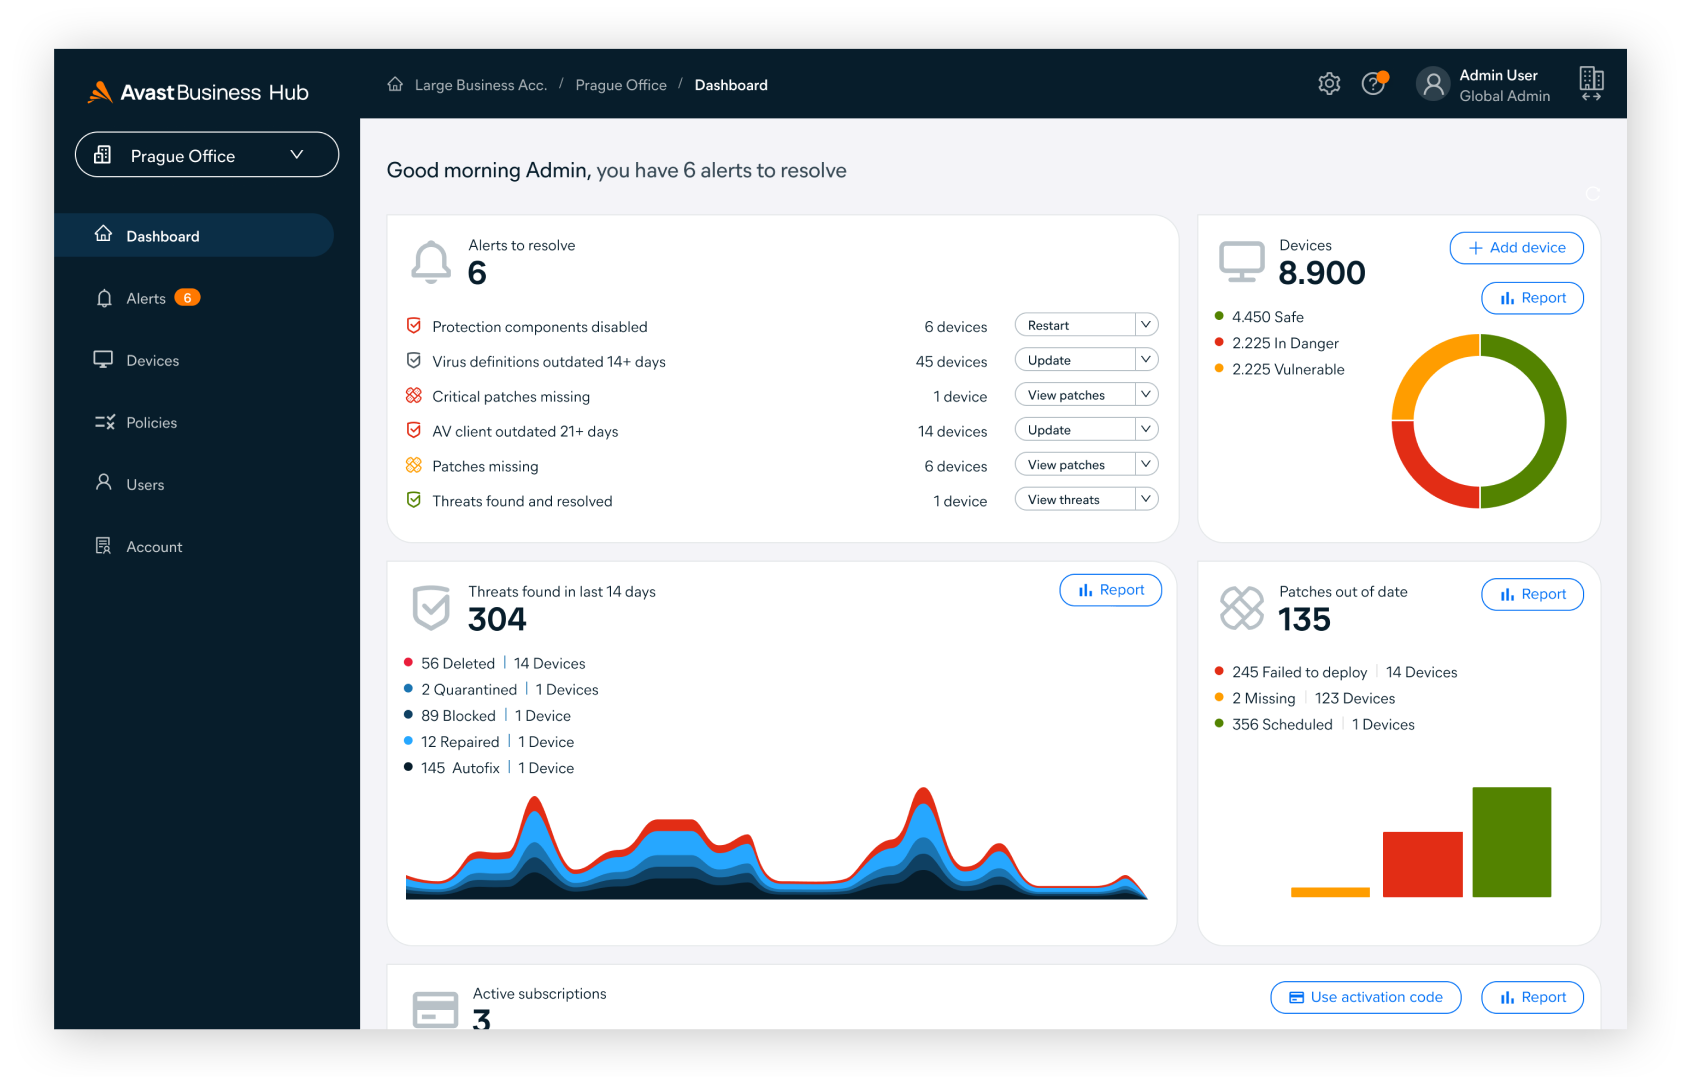 Avast Business Hub lets you monitor your entire network from one easy-to-use dashboard.